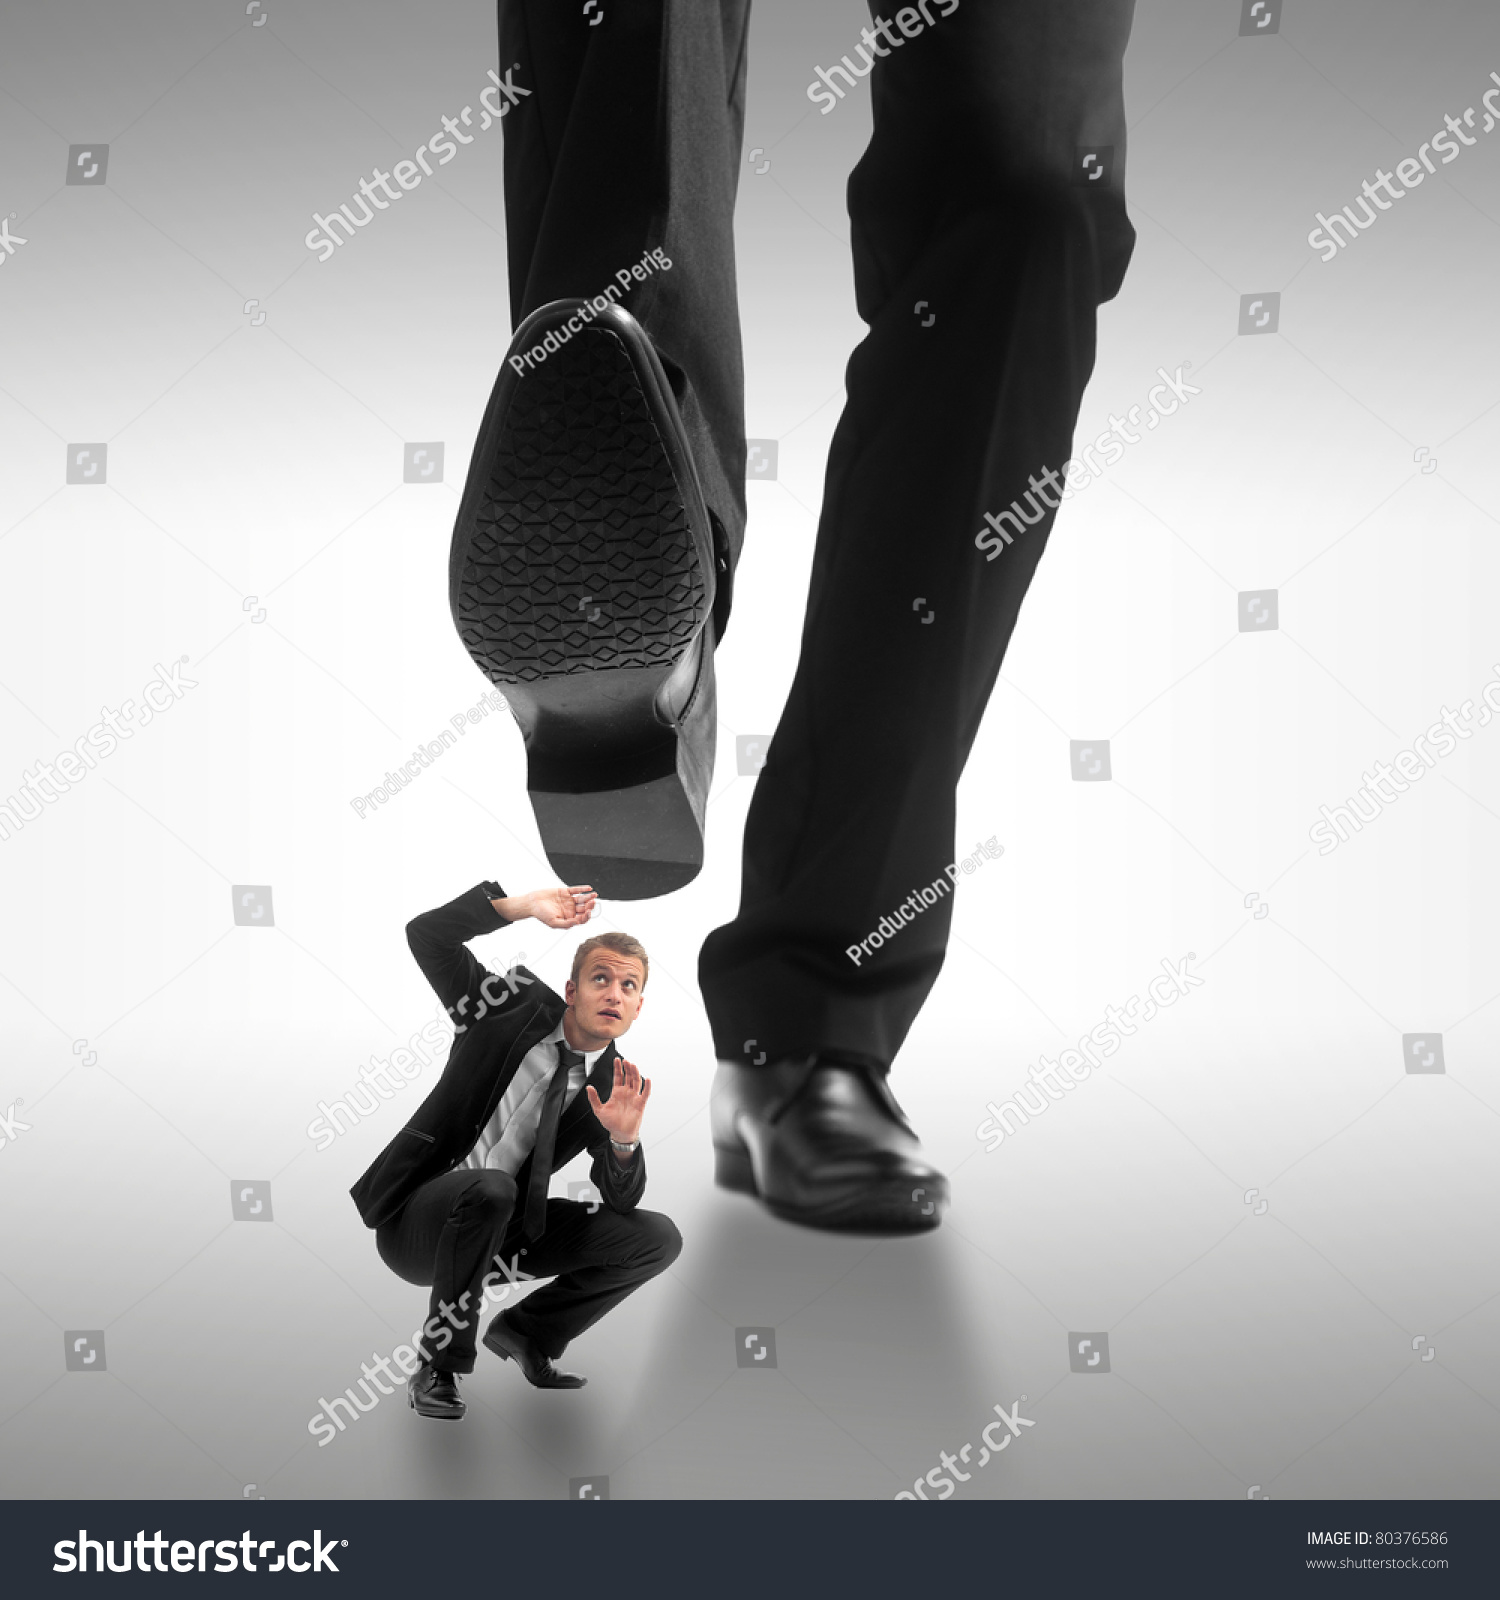 stock-photo-little-business-man-being-crushed-by-the-feet-of-a-giant-business-man-80376586.jpg